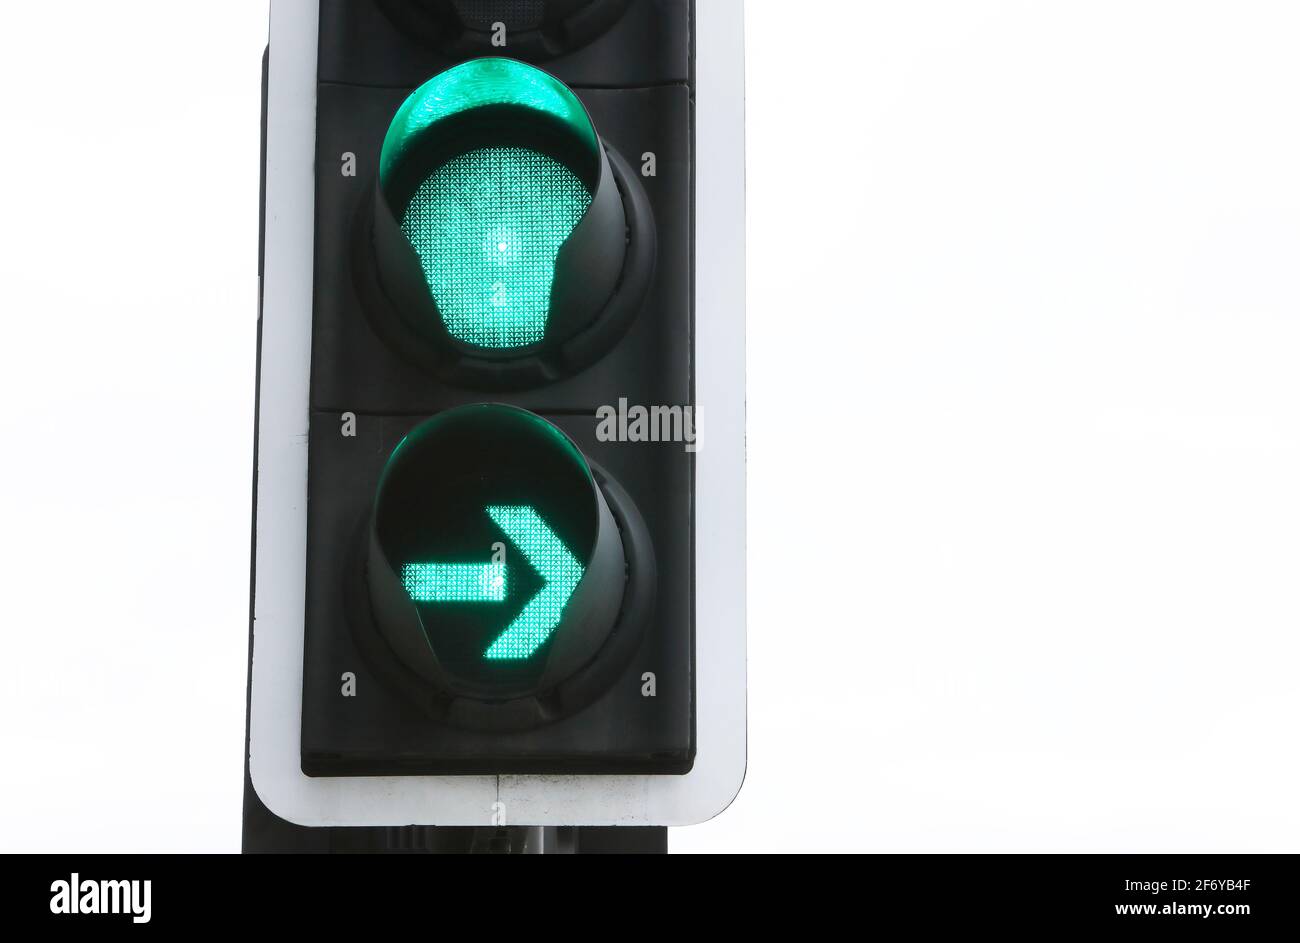 Traffic light on green with green filter, UK Stock Photo - Alamy